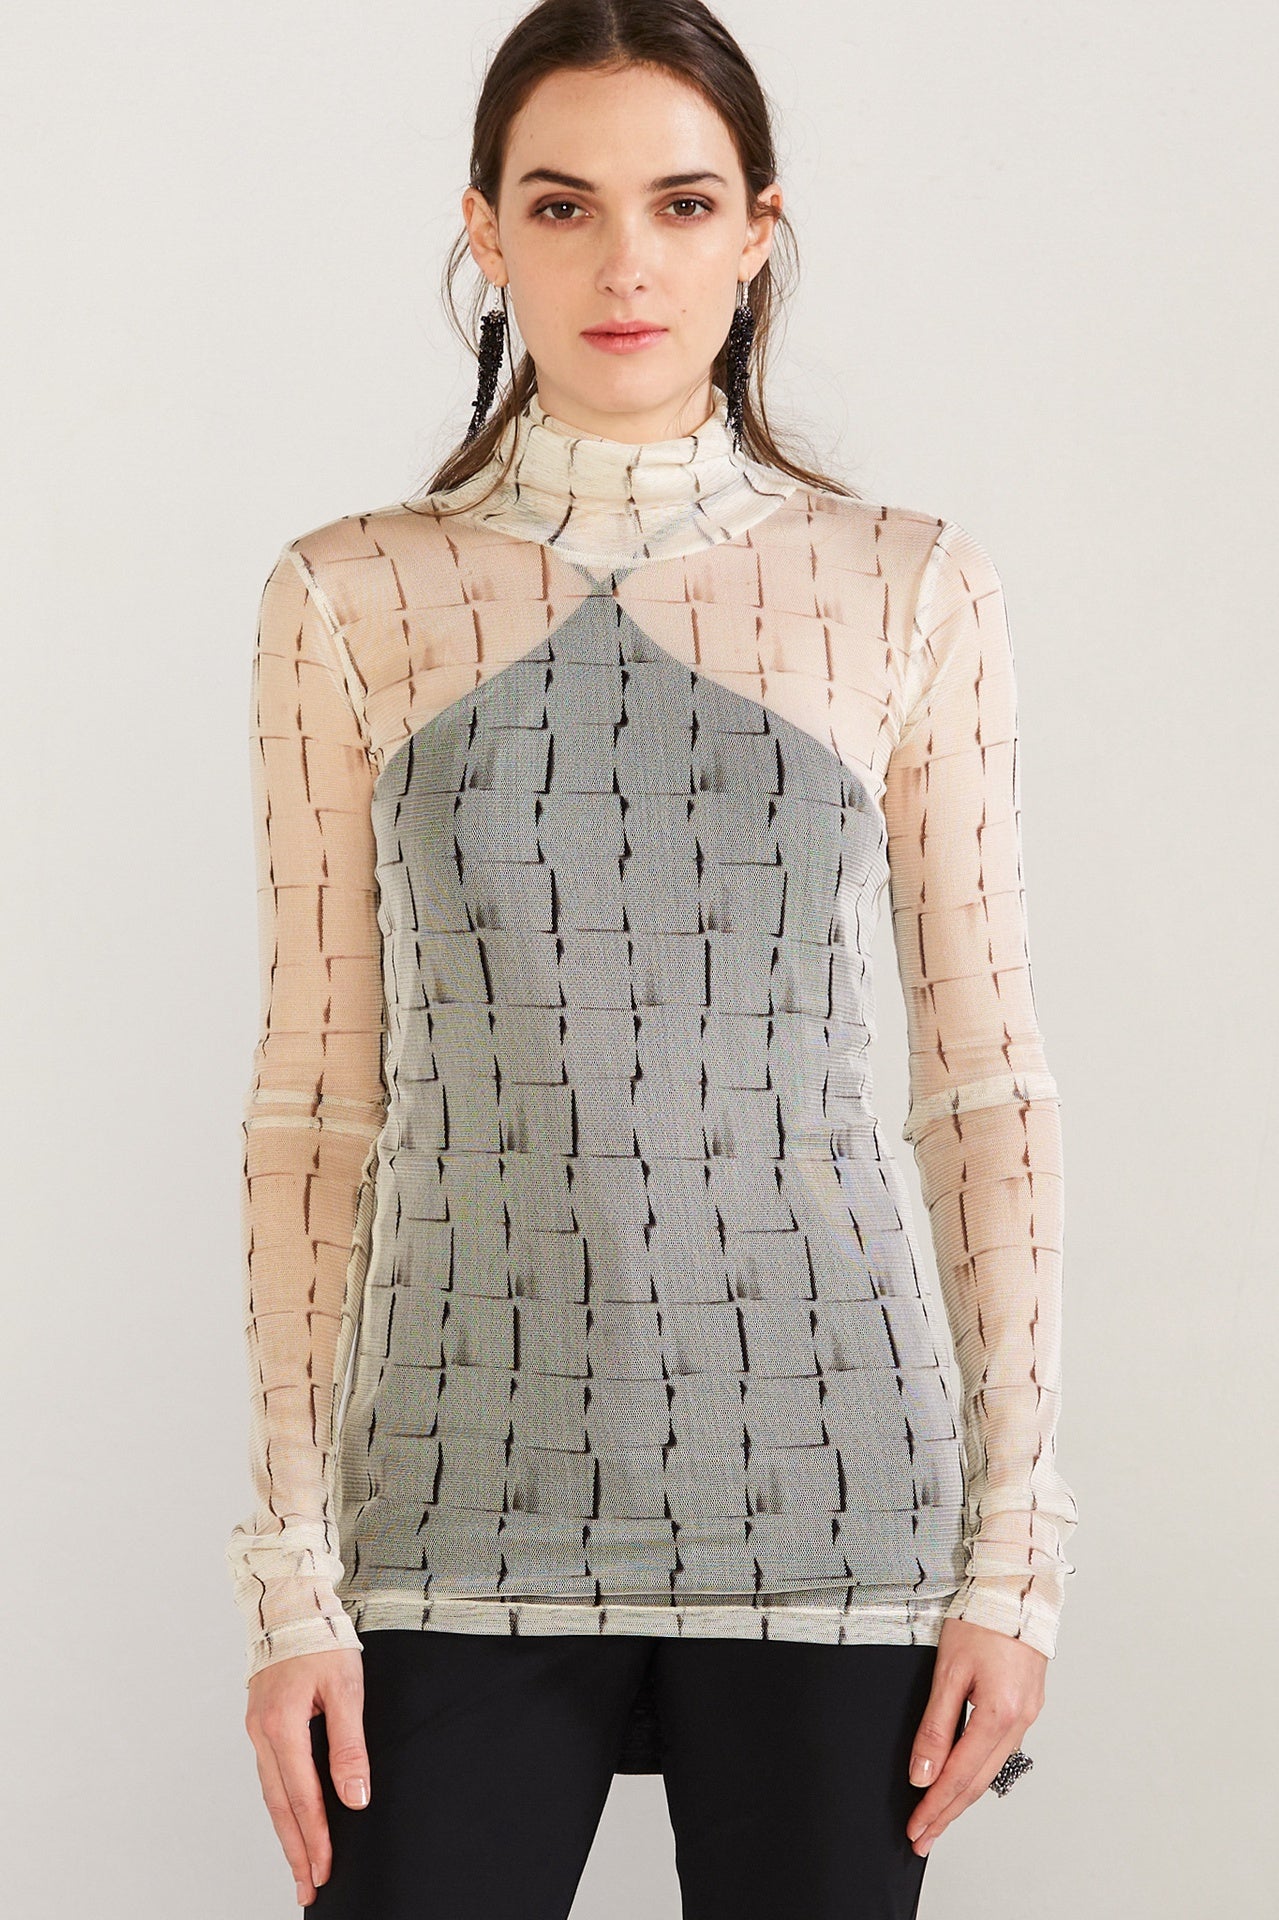 Print Fitted Translucent Tunic - Framework Print in Ivory - Taylor